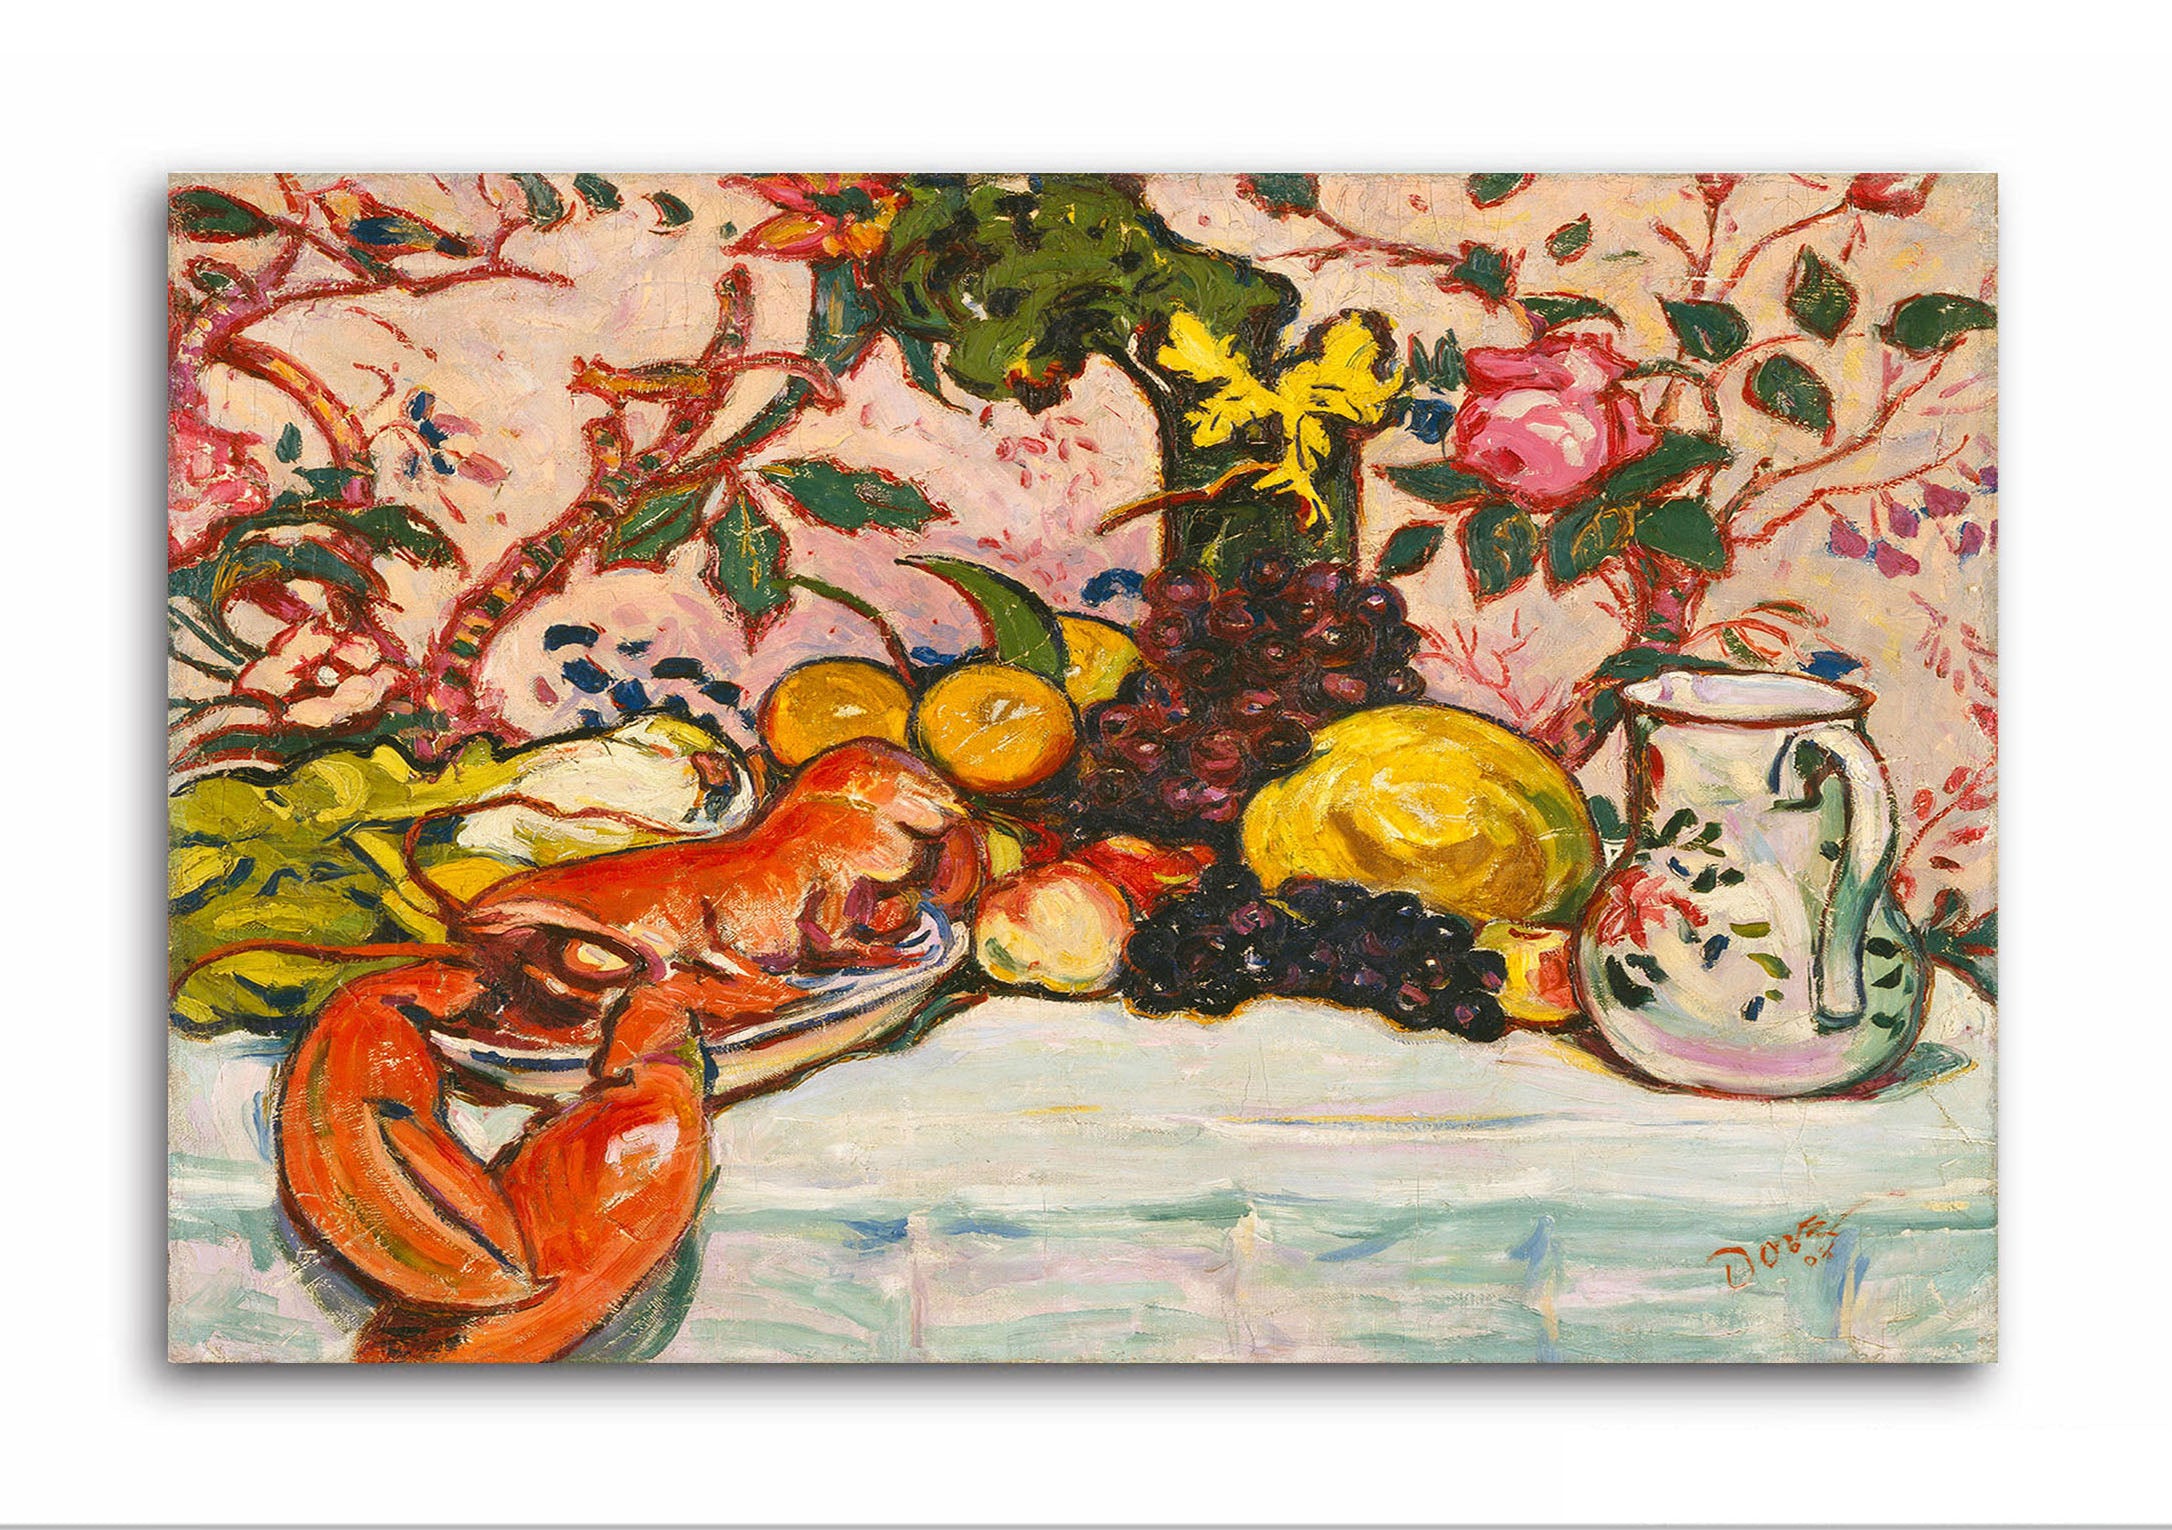 The Lobster With Fruit - Unframed Canvas Painting